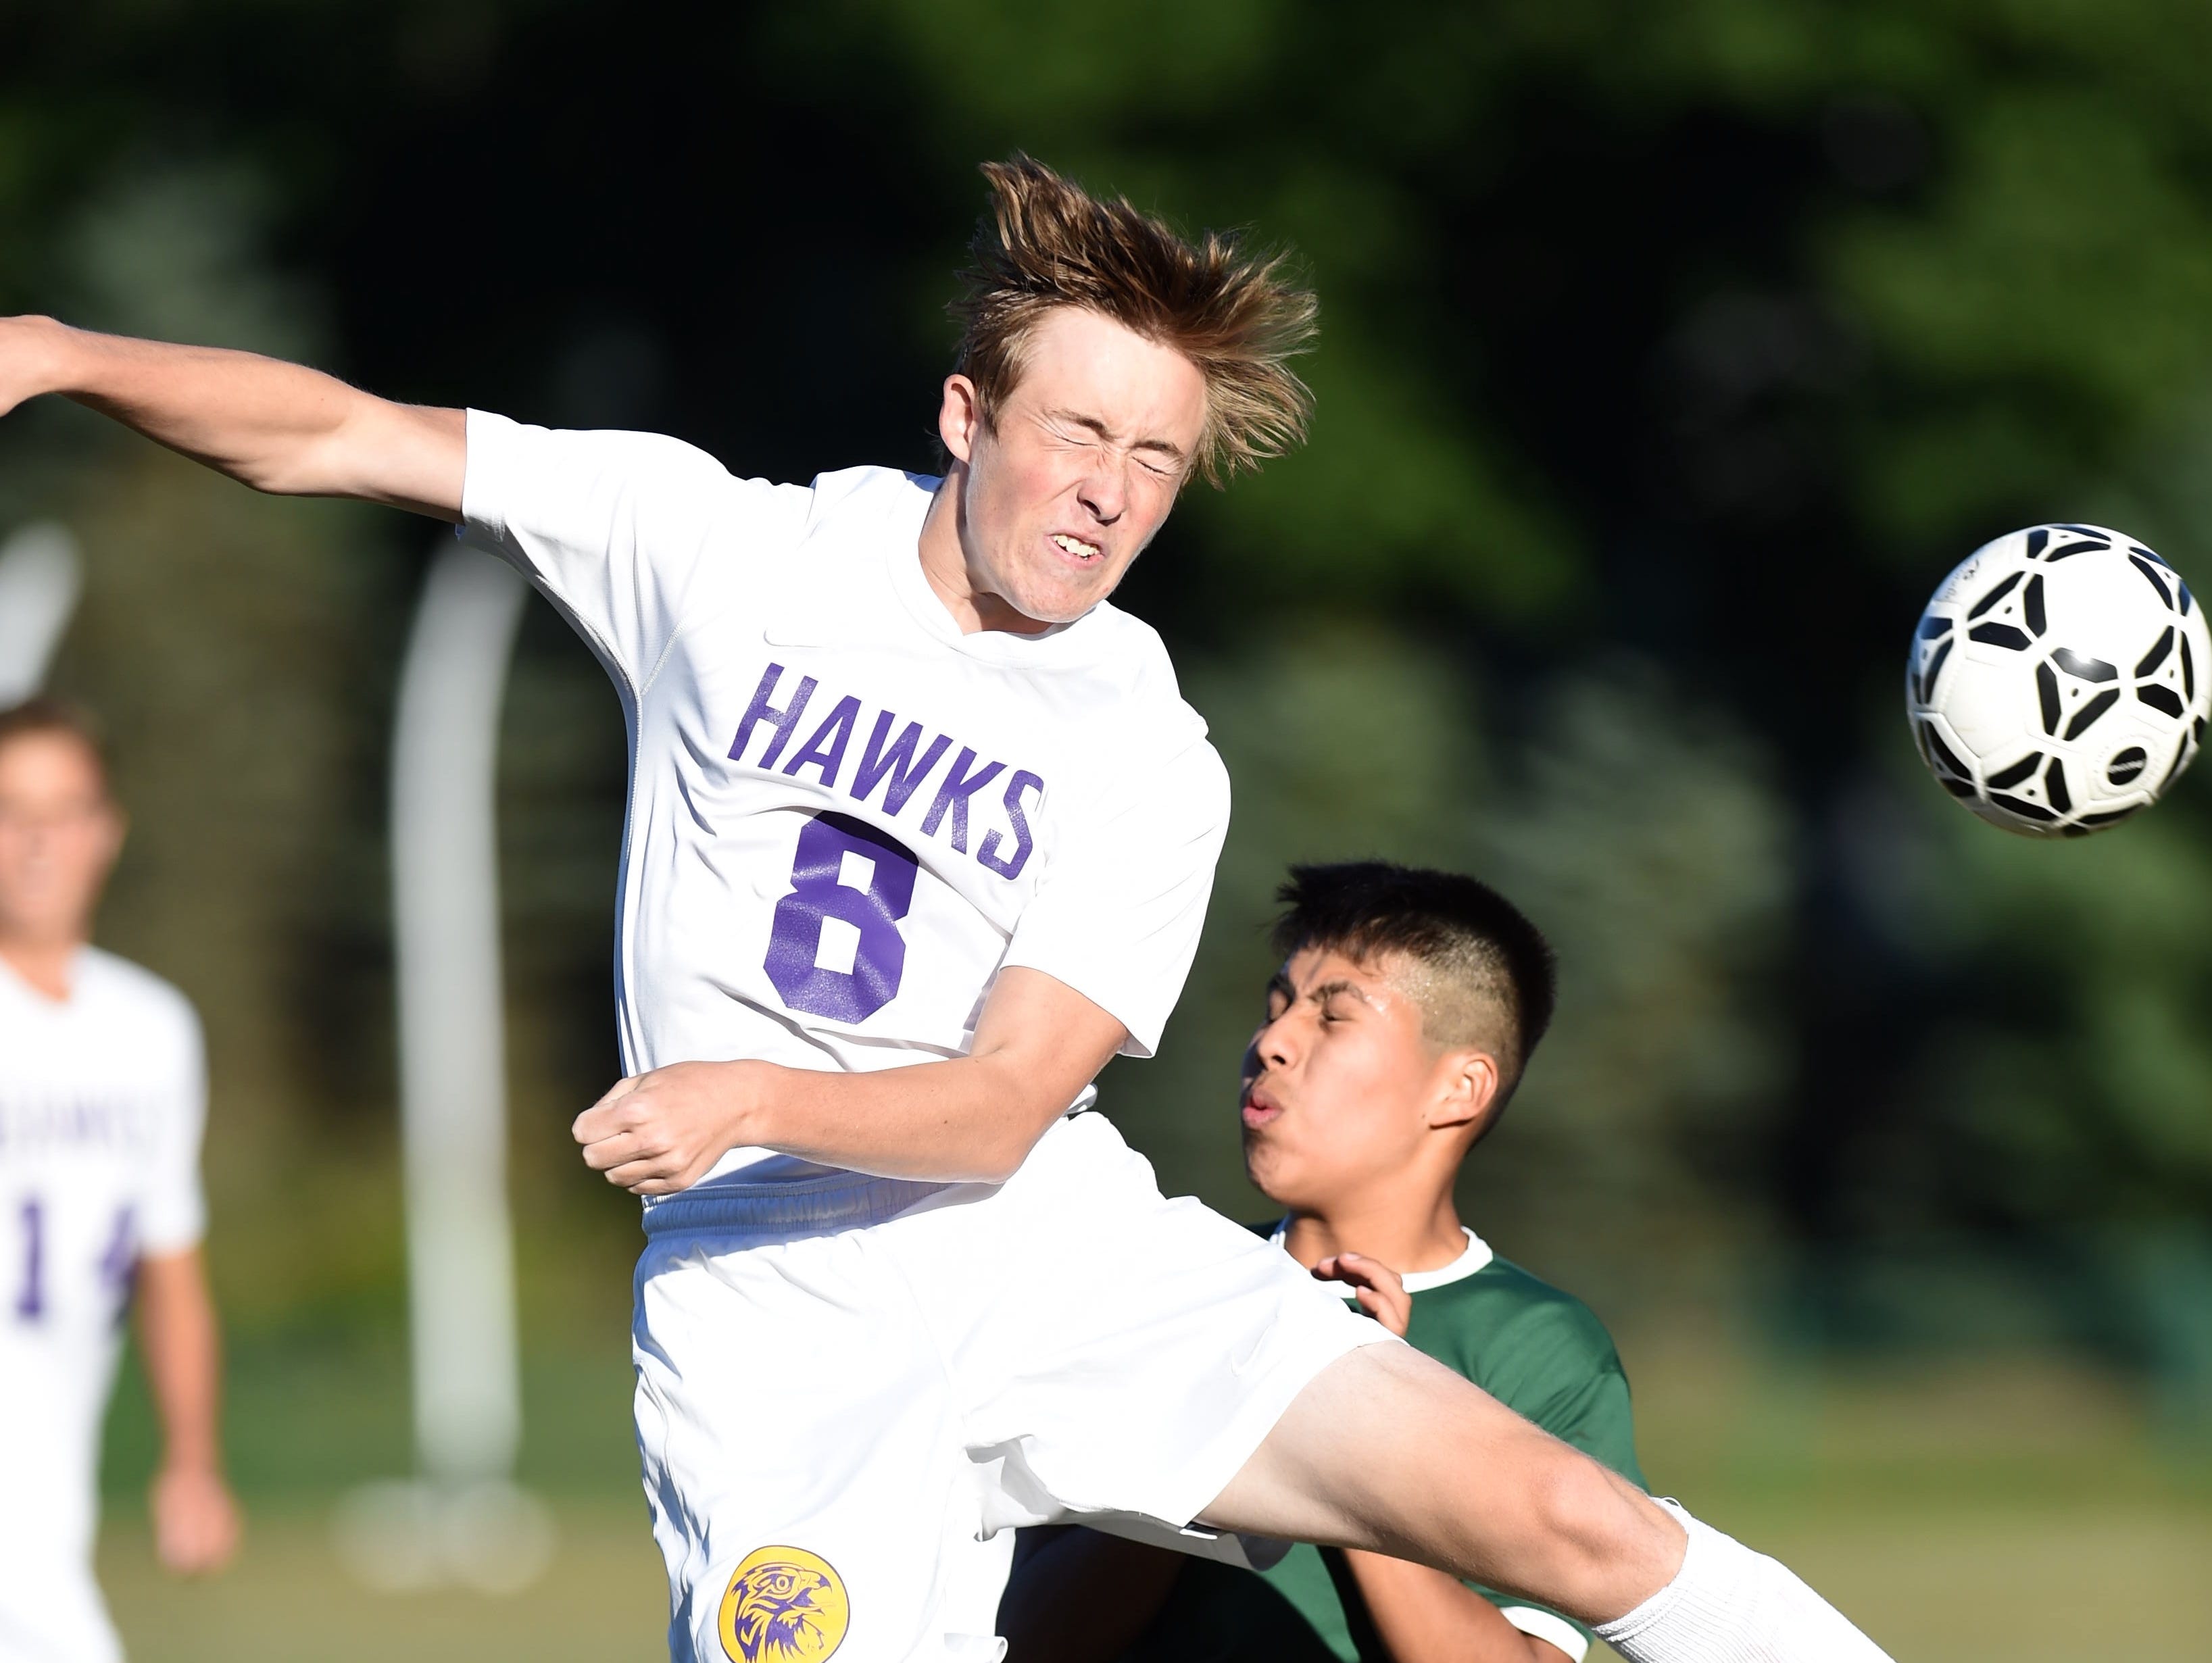 Rhinebeck's Nate Shanahan goes up for a header against Webutuck's Omar Reyes during Thursday's game at Rhinebeck.